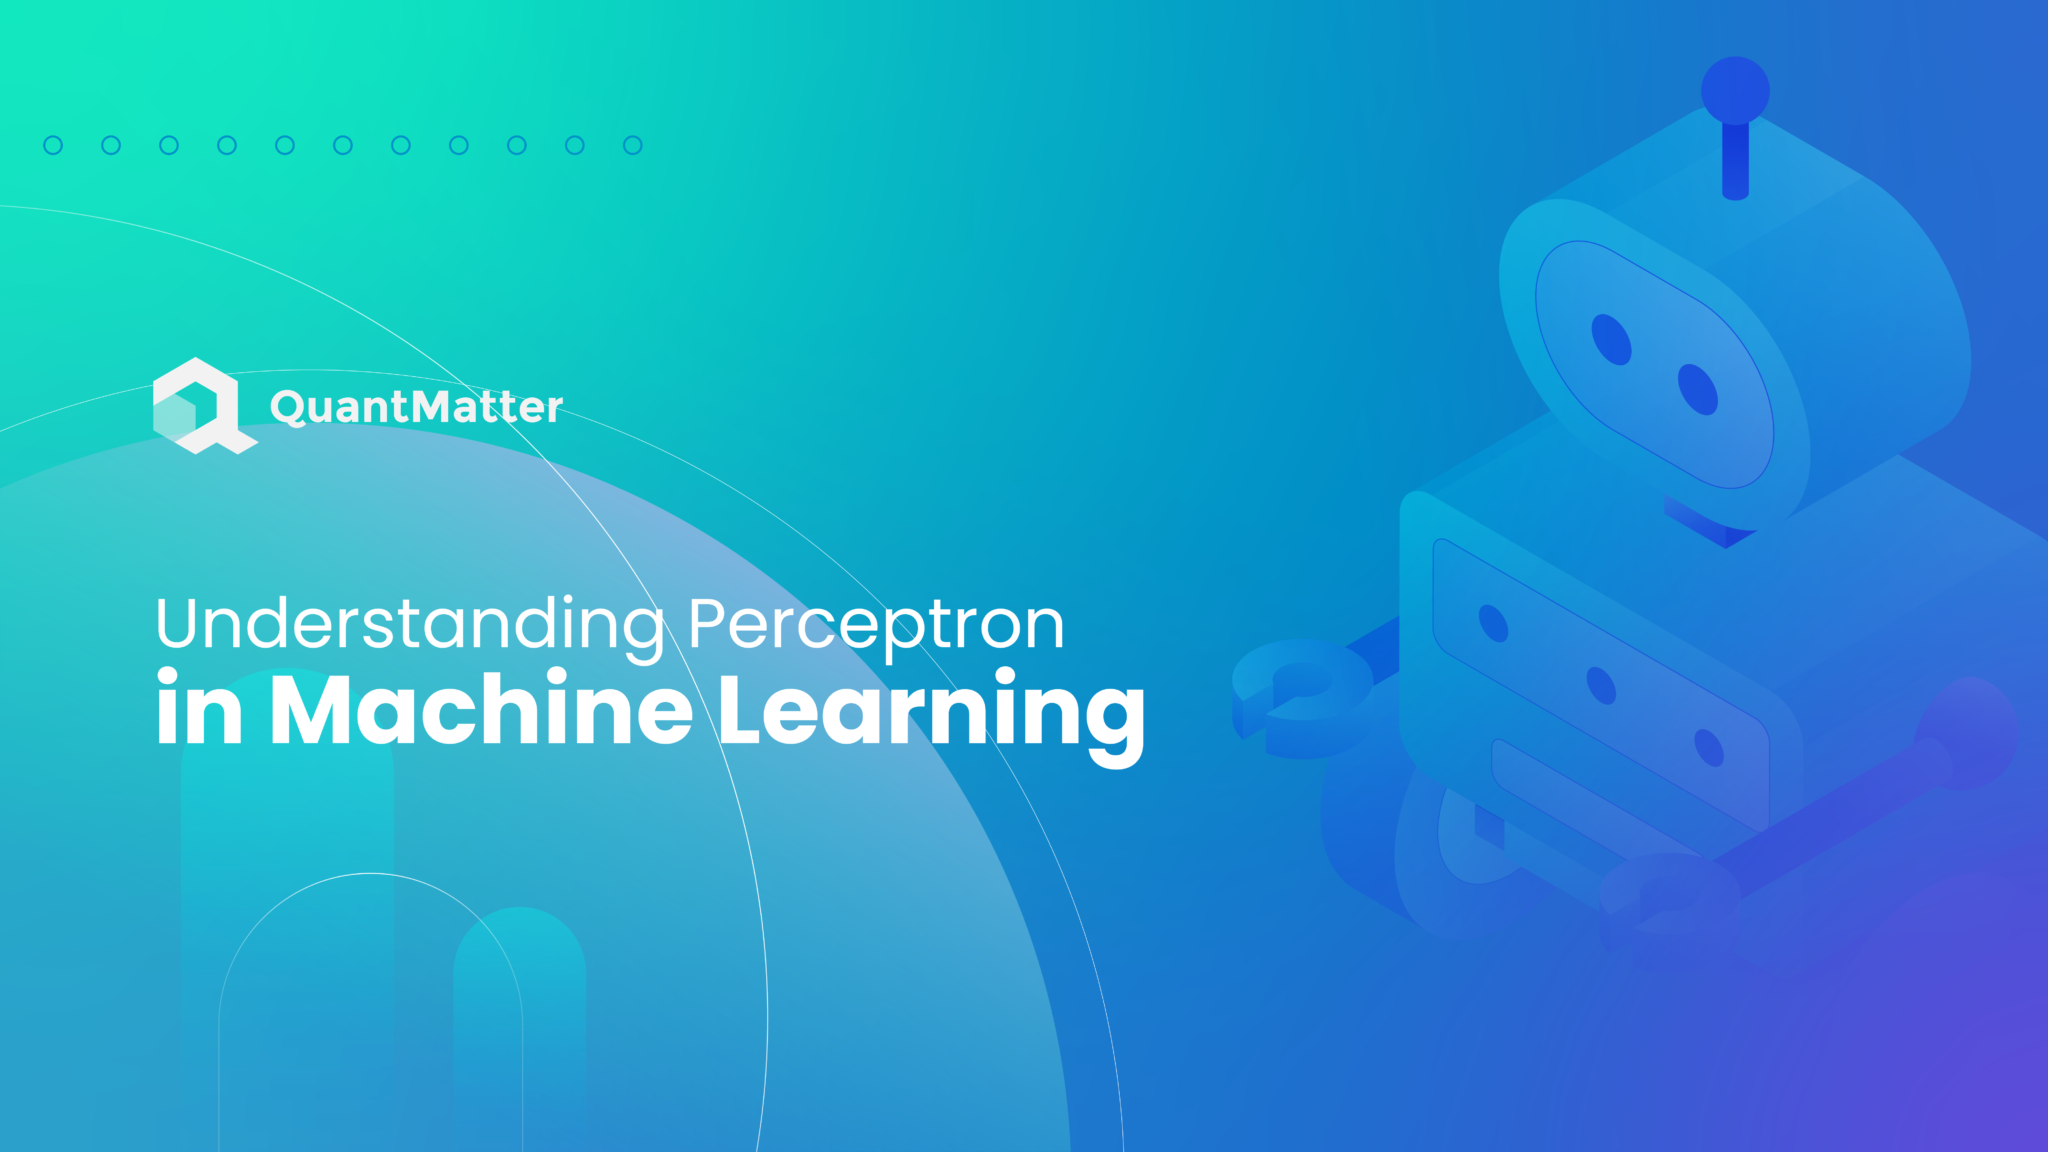 What is Perceptron in Machine Learning?